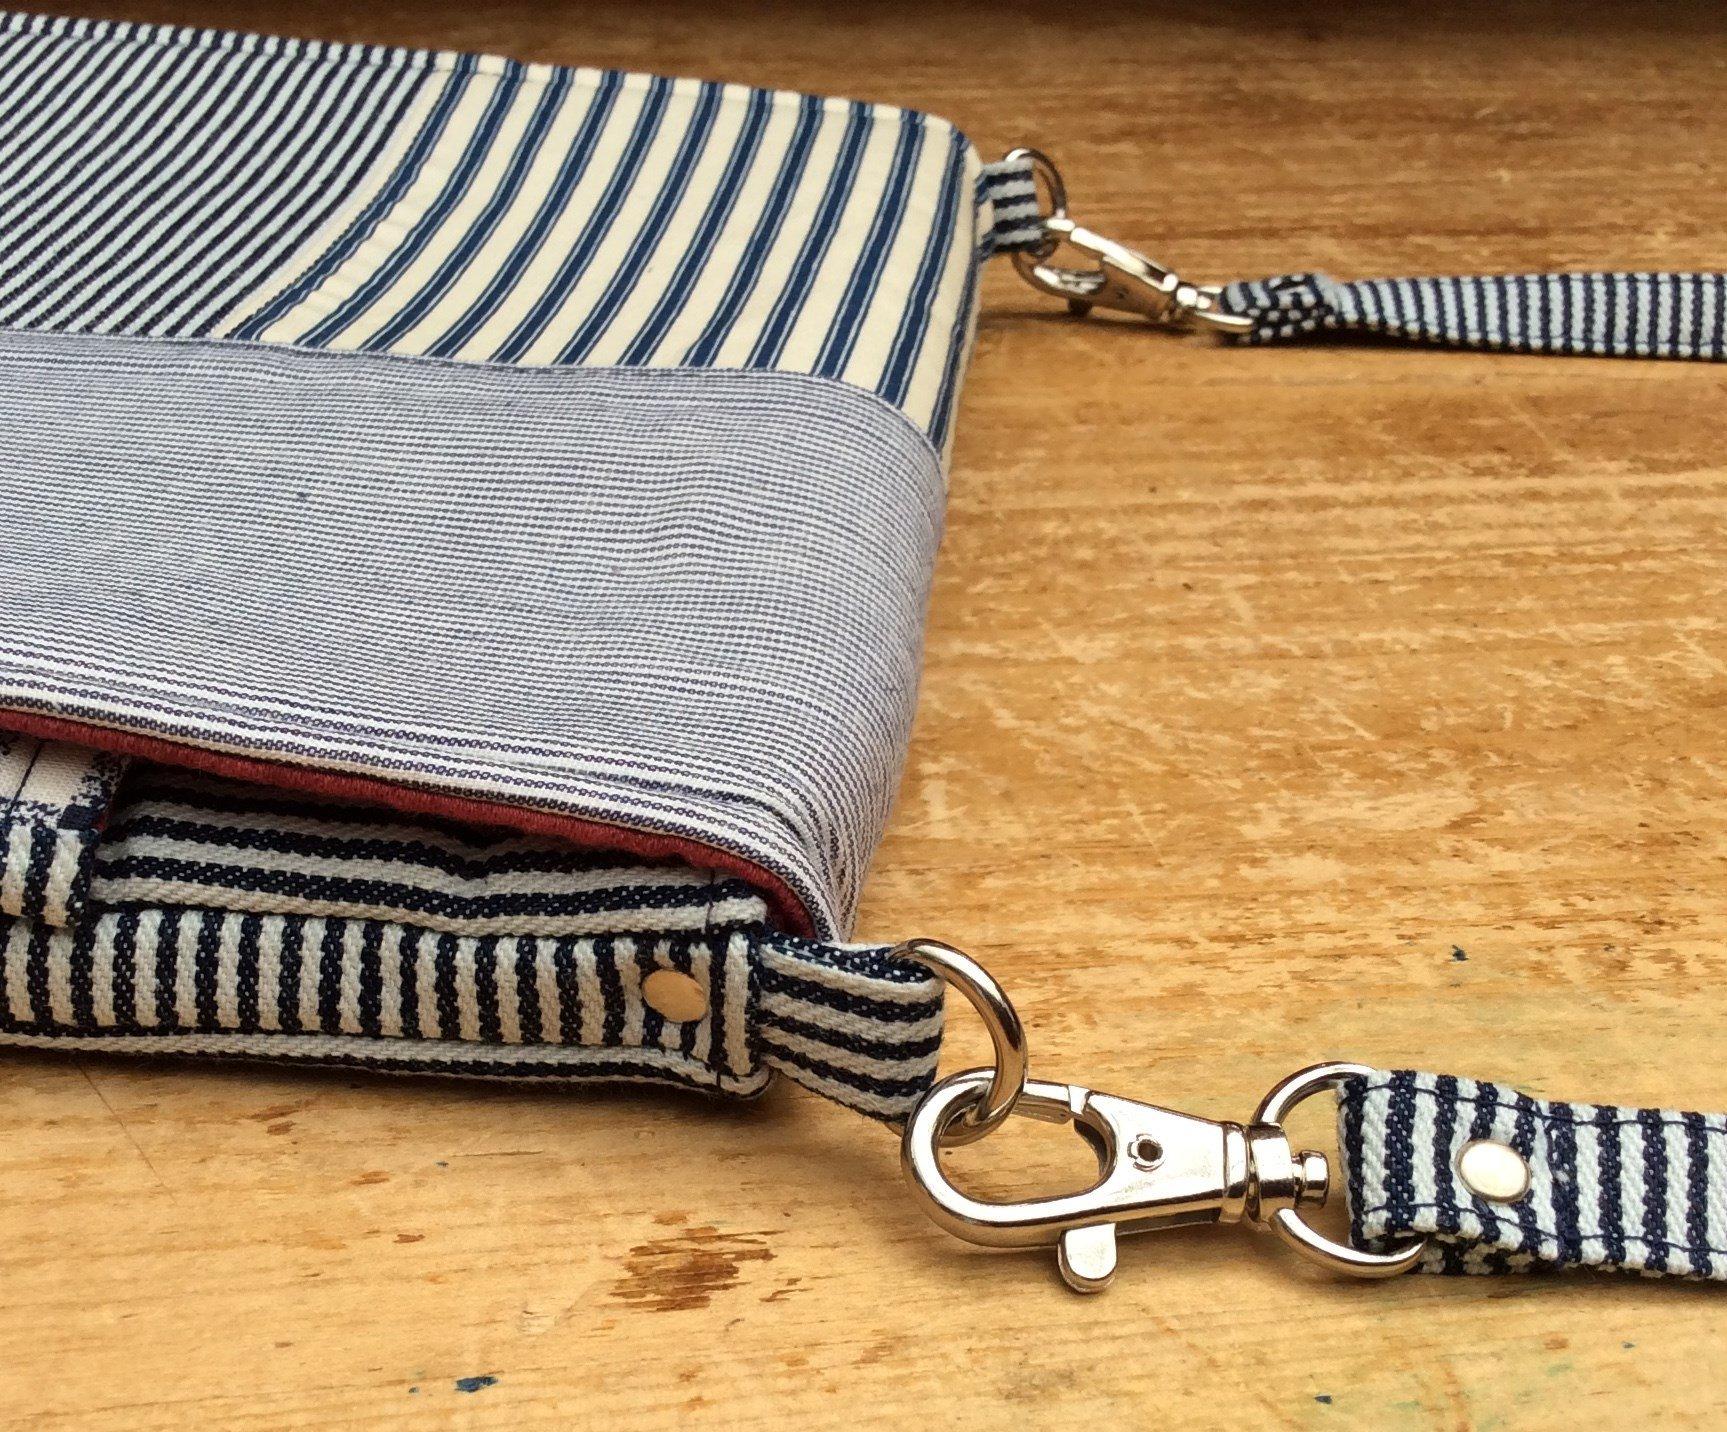 wristlet made using 1/2" D ring and lobster clasp x 4 per pack